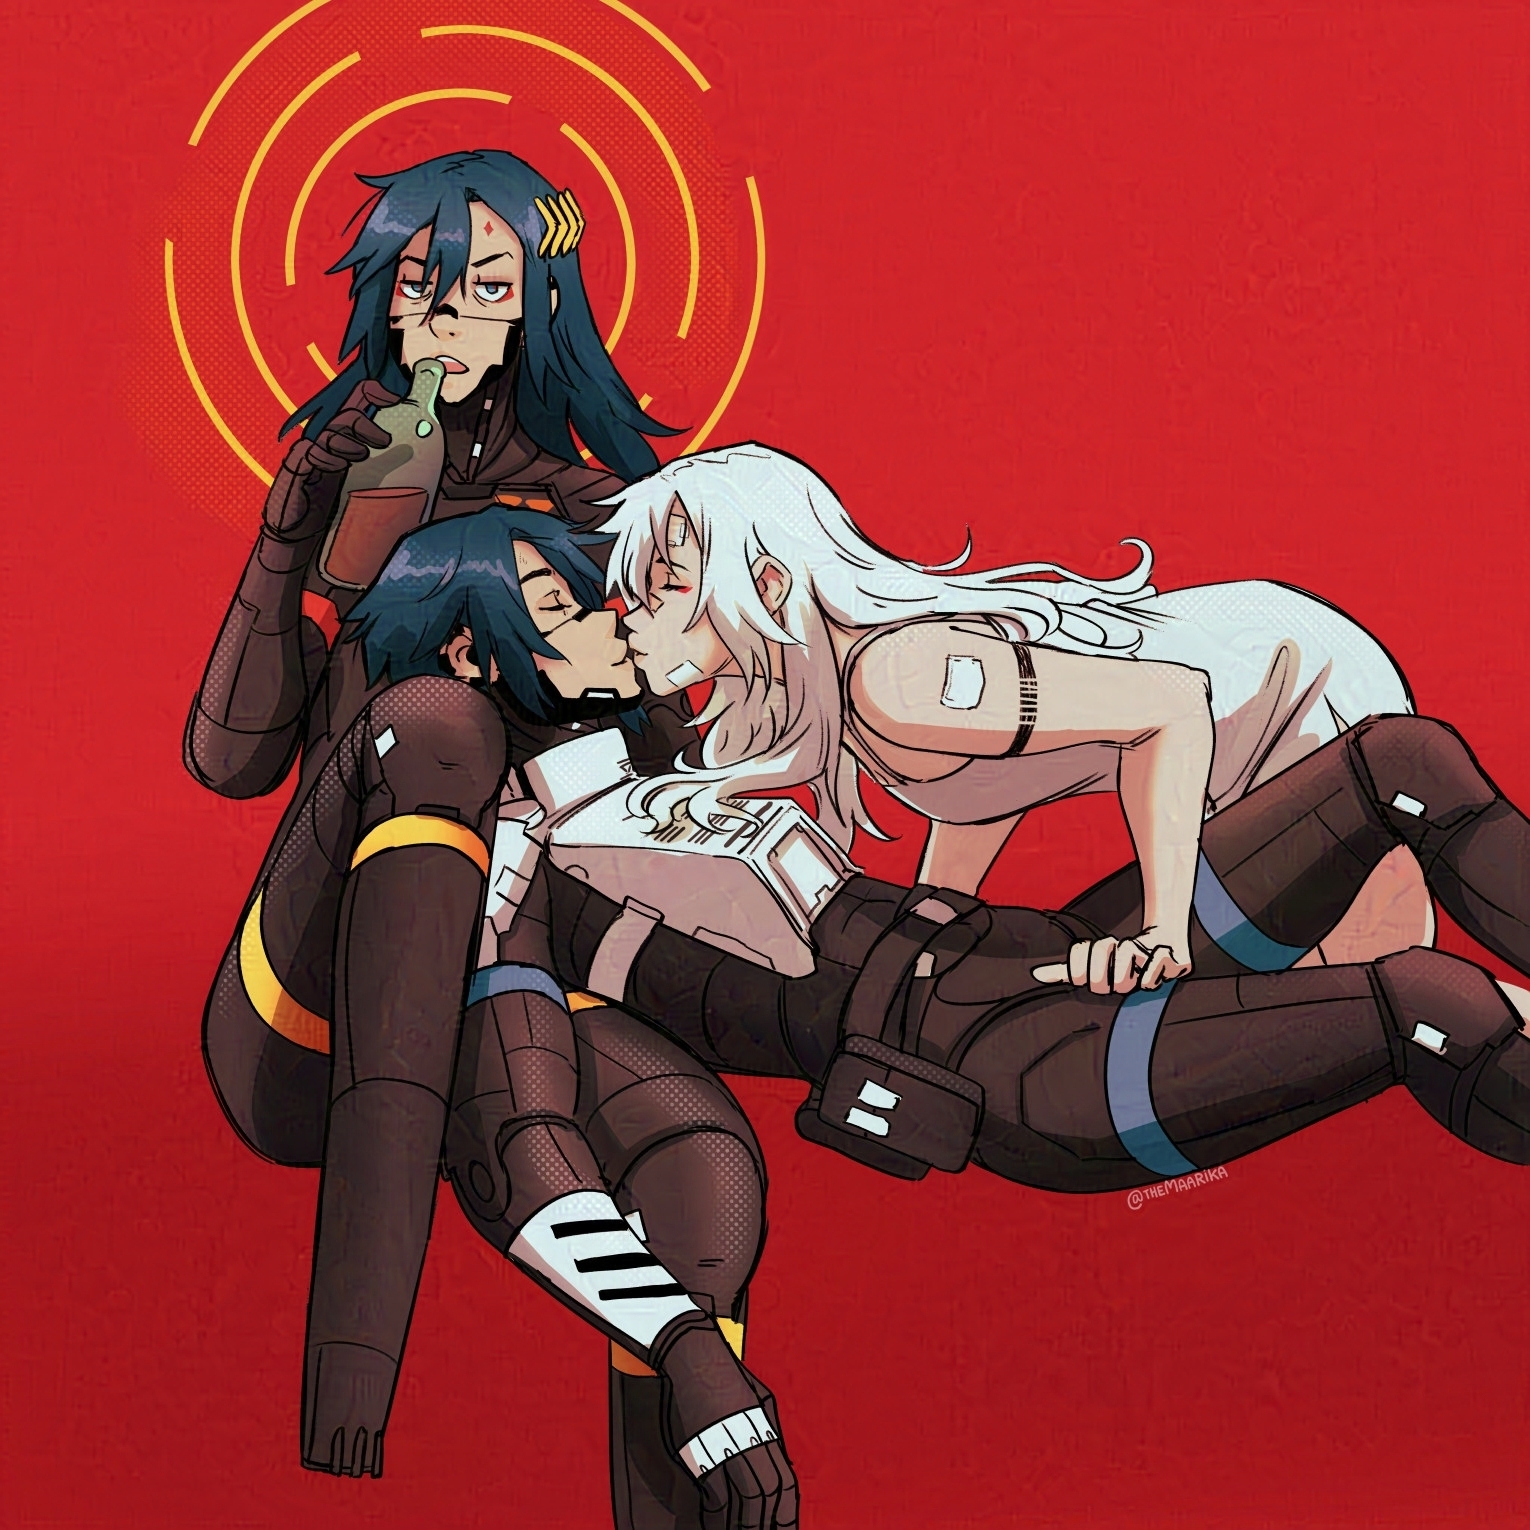 Fanart of SIGNALIS depicting Falke, Elster and Ariane on a red background. Falke sitting and drinking and looking annoyed while Elster is leaning on her. Ariane and Elster are about to kiss. Ariane is a woman with white hair and a white dress. Both Falke and Elster are androids with blue hair. Falke has long hair while Elster is wearing her white armor.